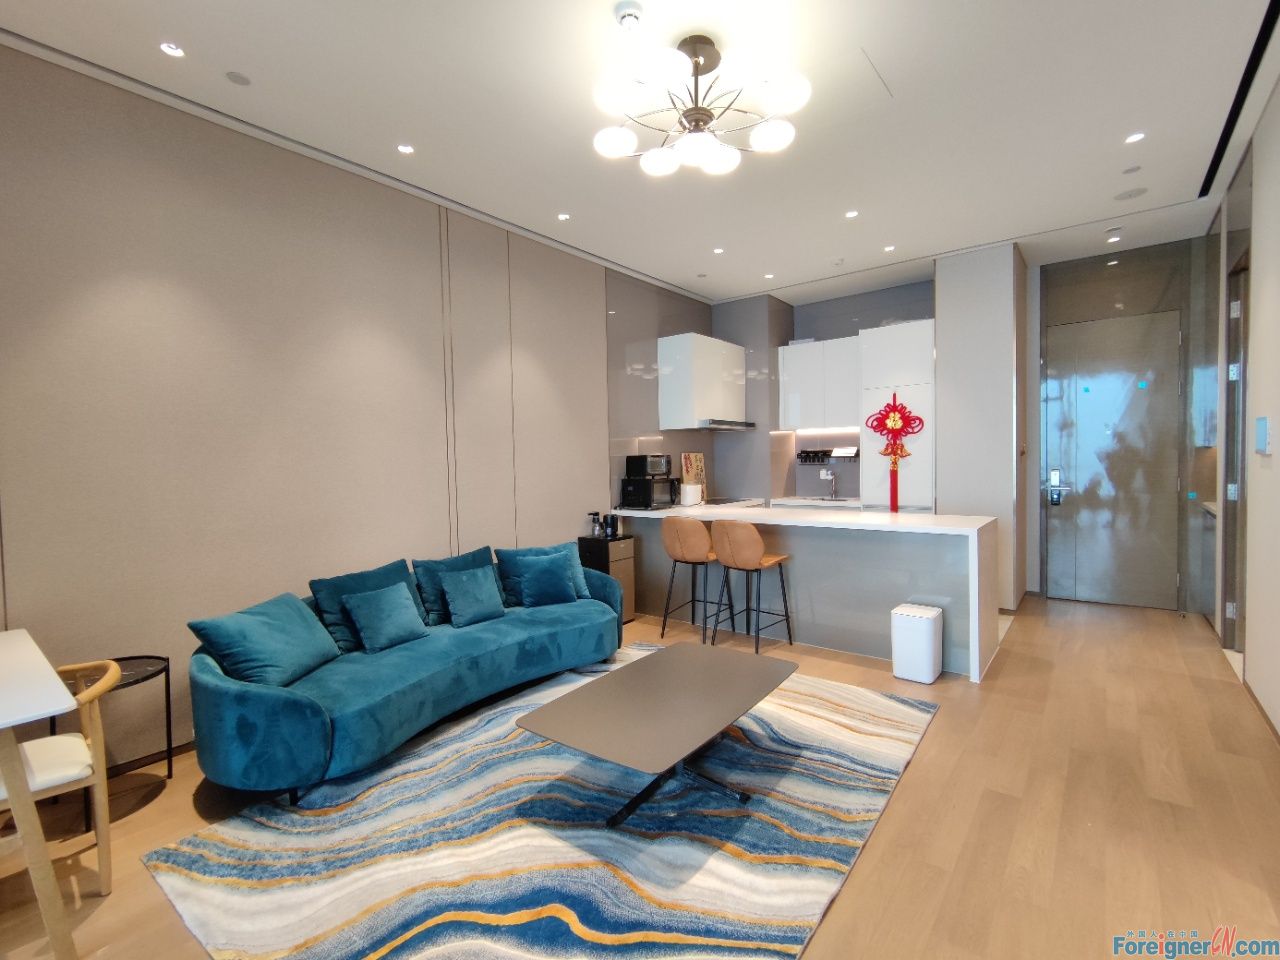 New!! IFS Sky Residence apartment to rent in SIP/High Floor/ central AC,lots of light room/Nearby Jinji Lake and Moon habor,Shin Kong Palaz/Time Square,Subway line 1 